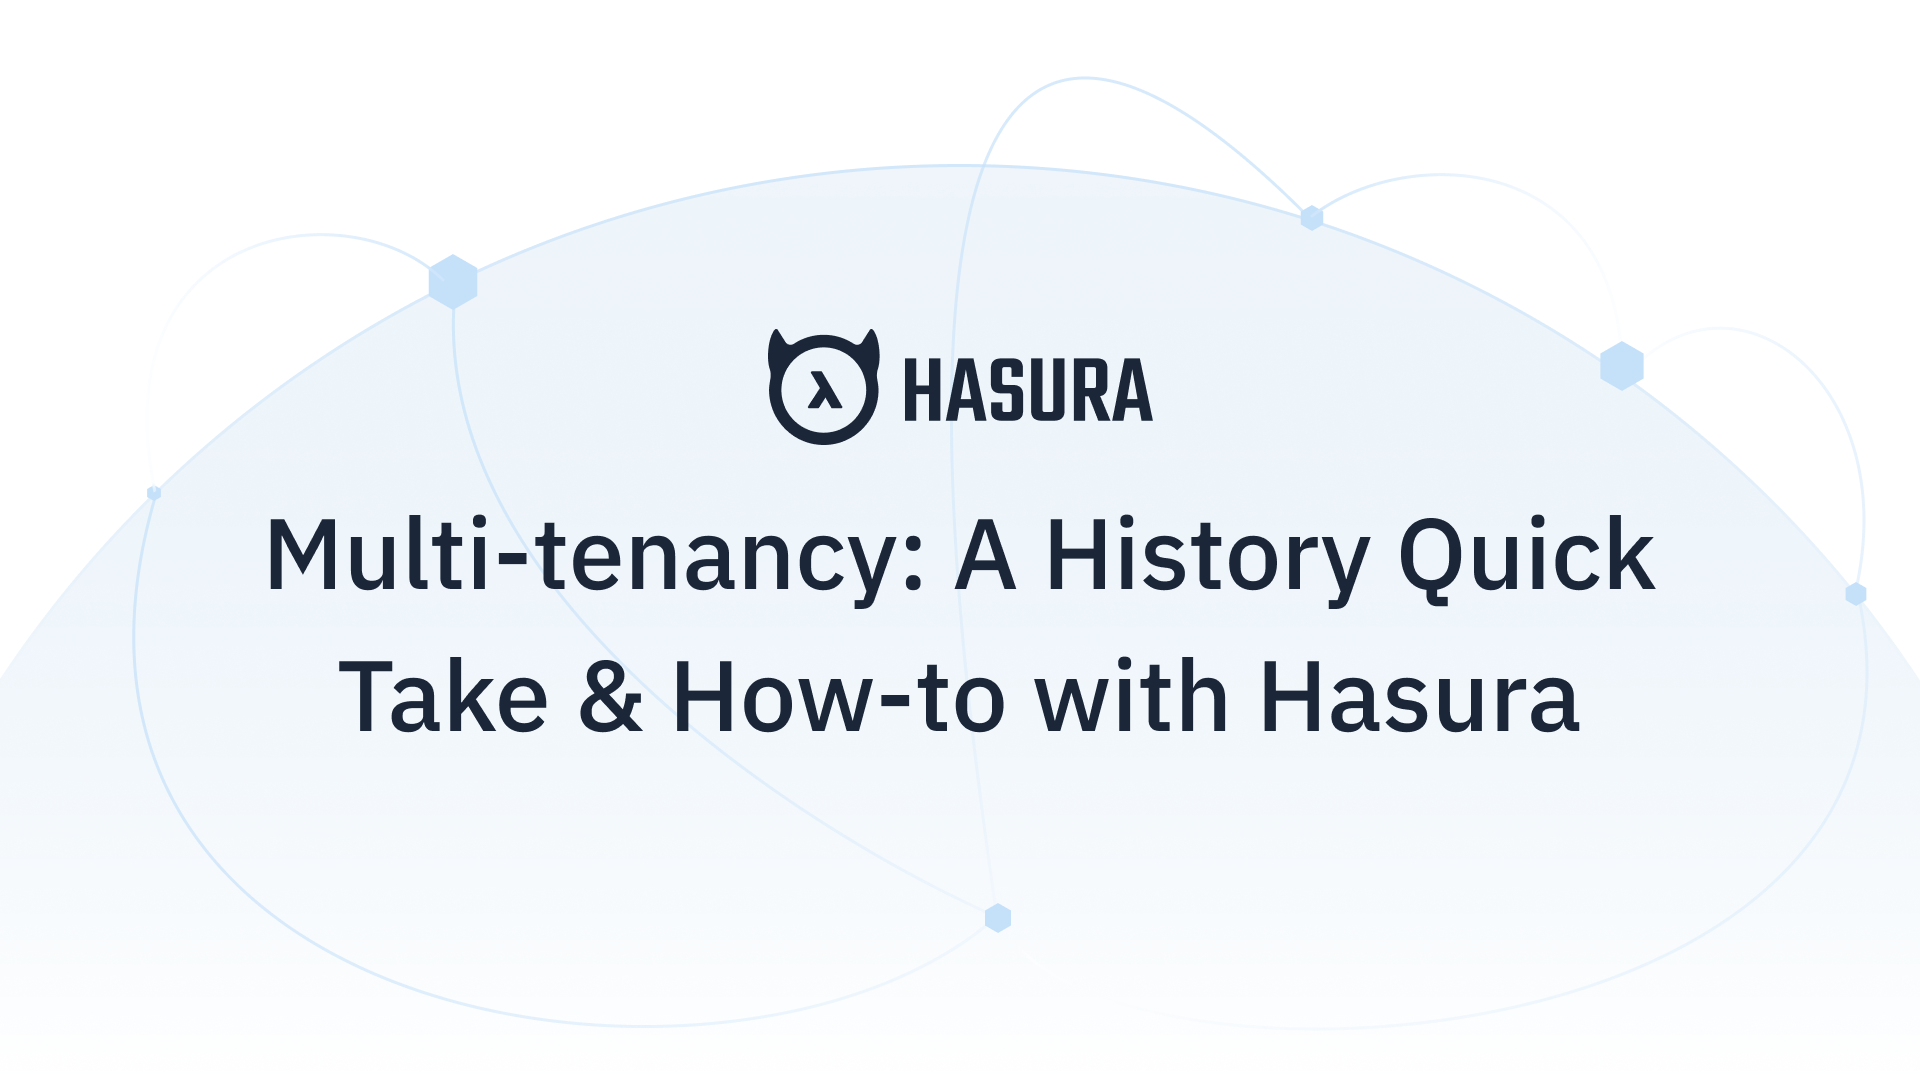 Multi-tenancy: A History Quick Take & How-to with Hasura